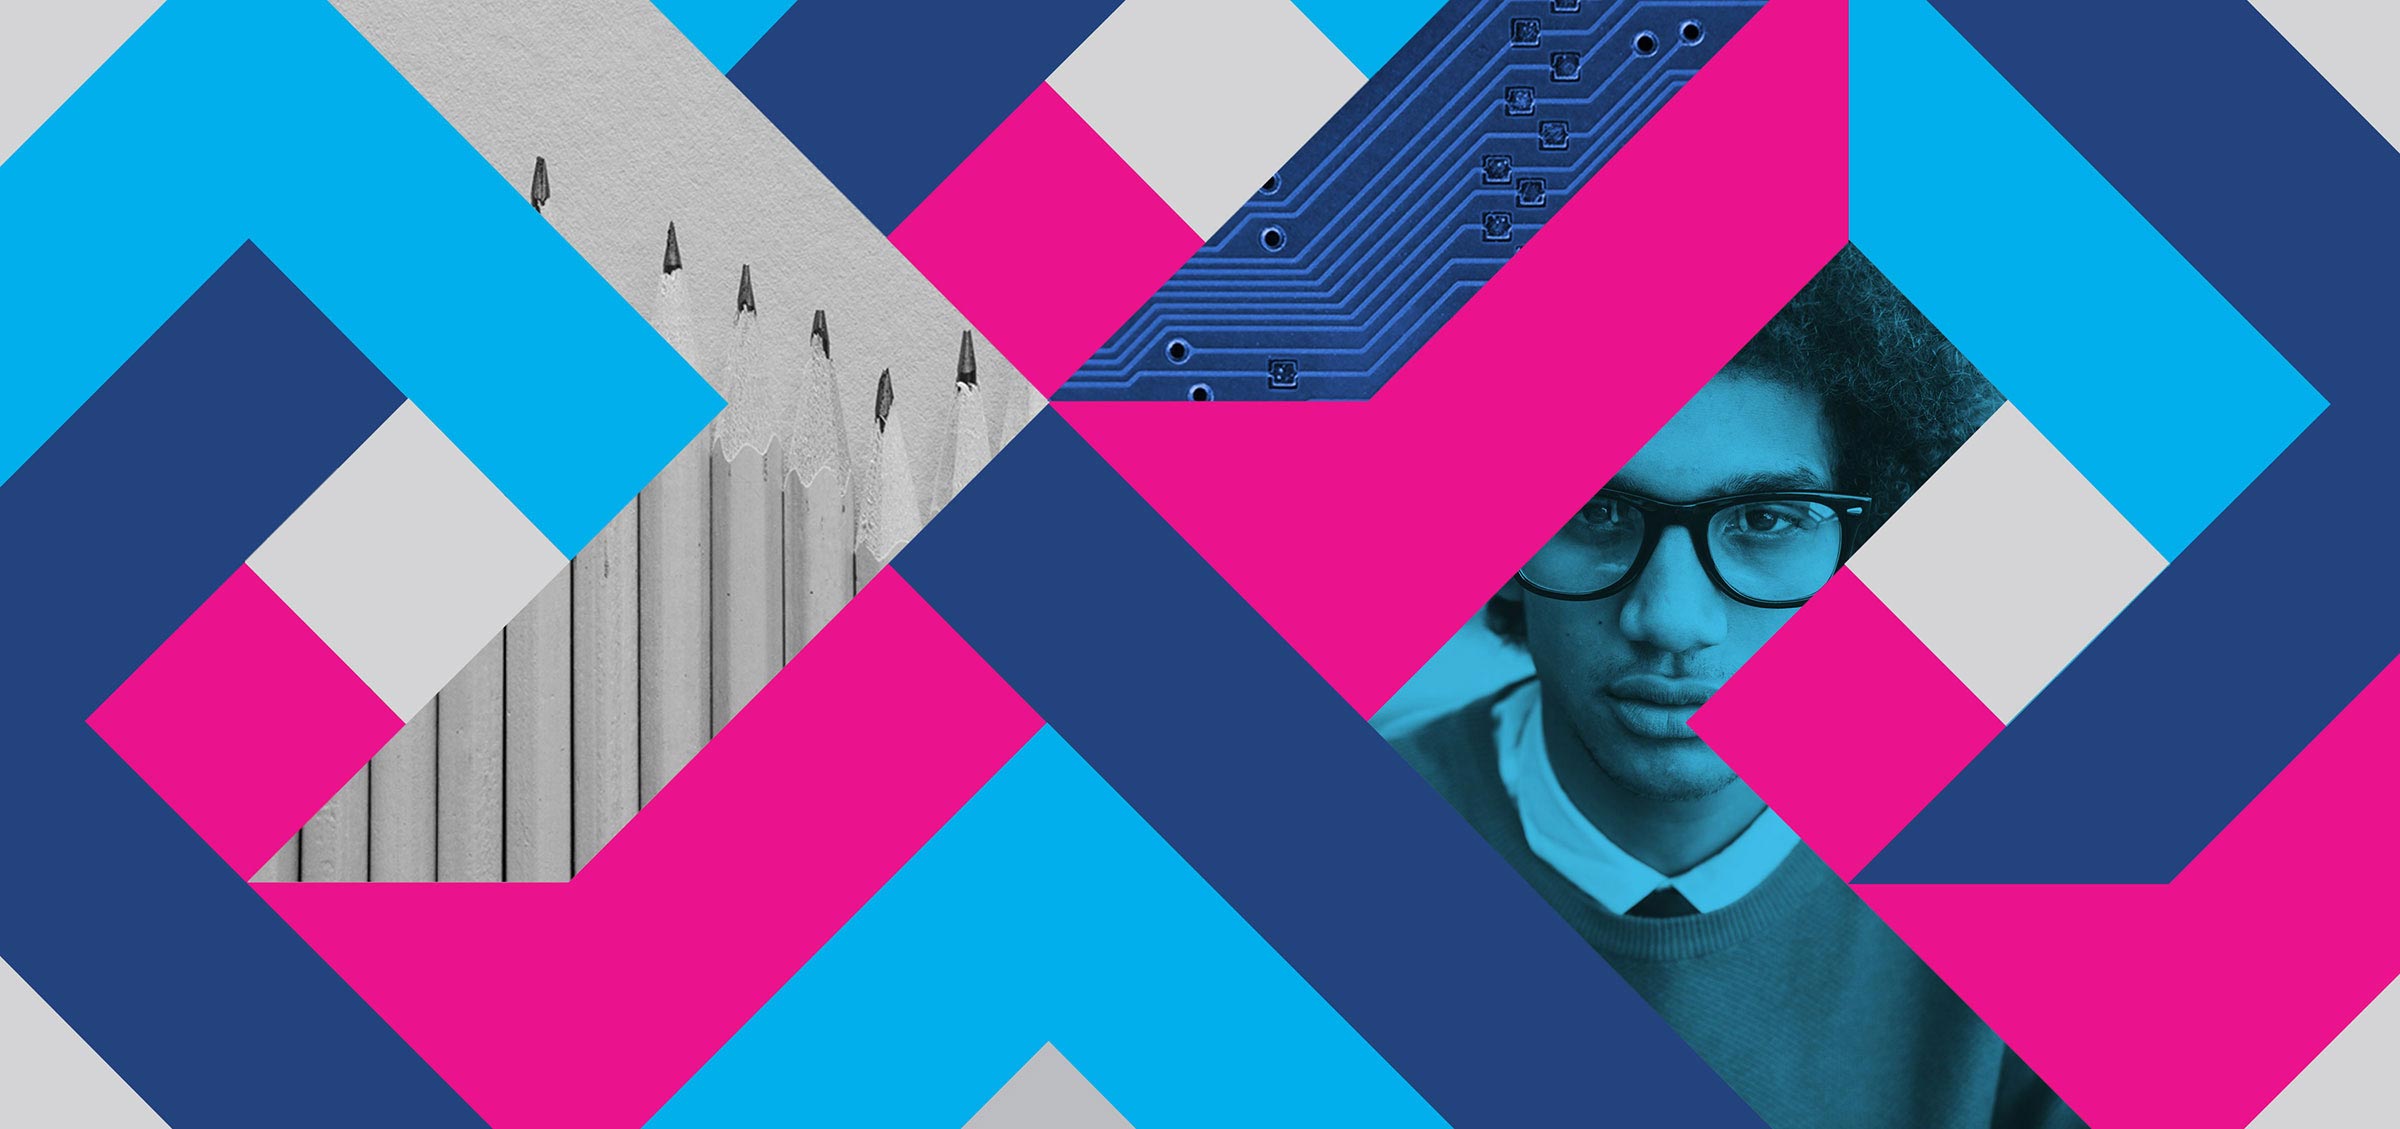 abstract digital design using angles and triangles in cyan, magenta, blue and gray with a photo of a black student inside the shapes